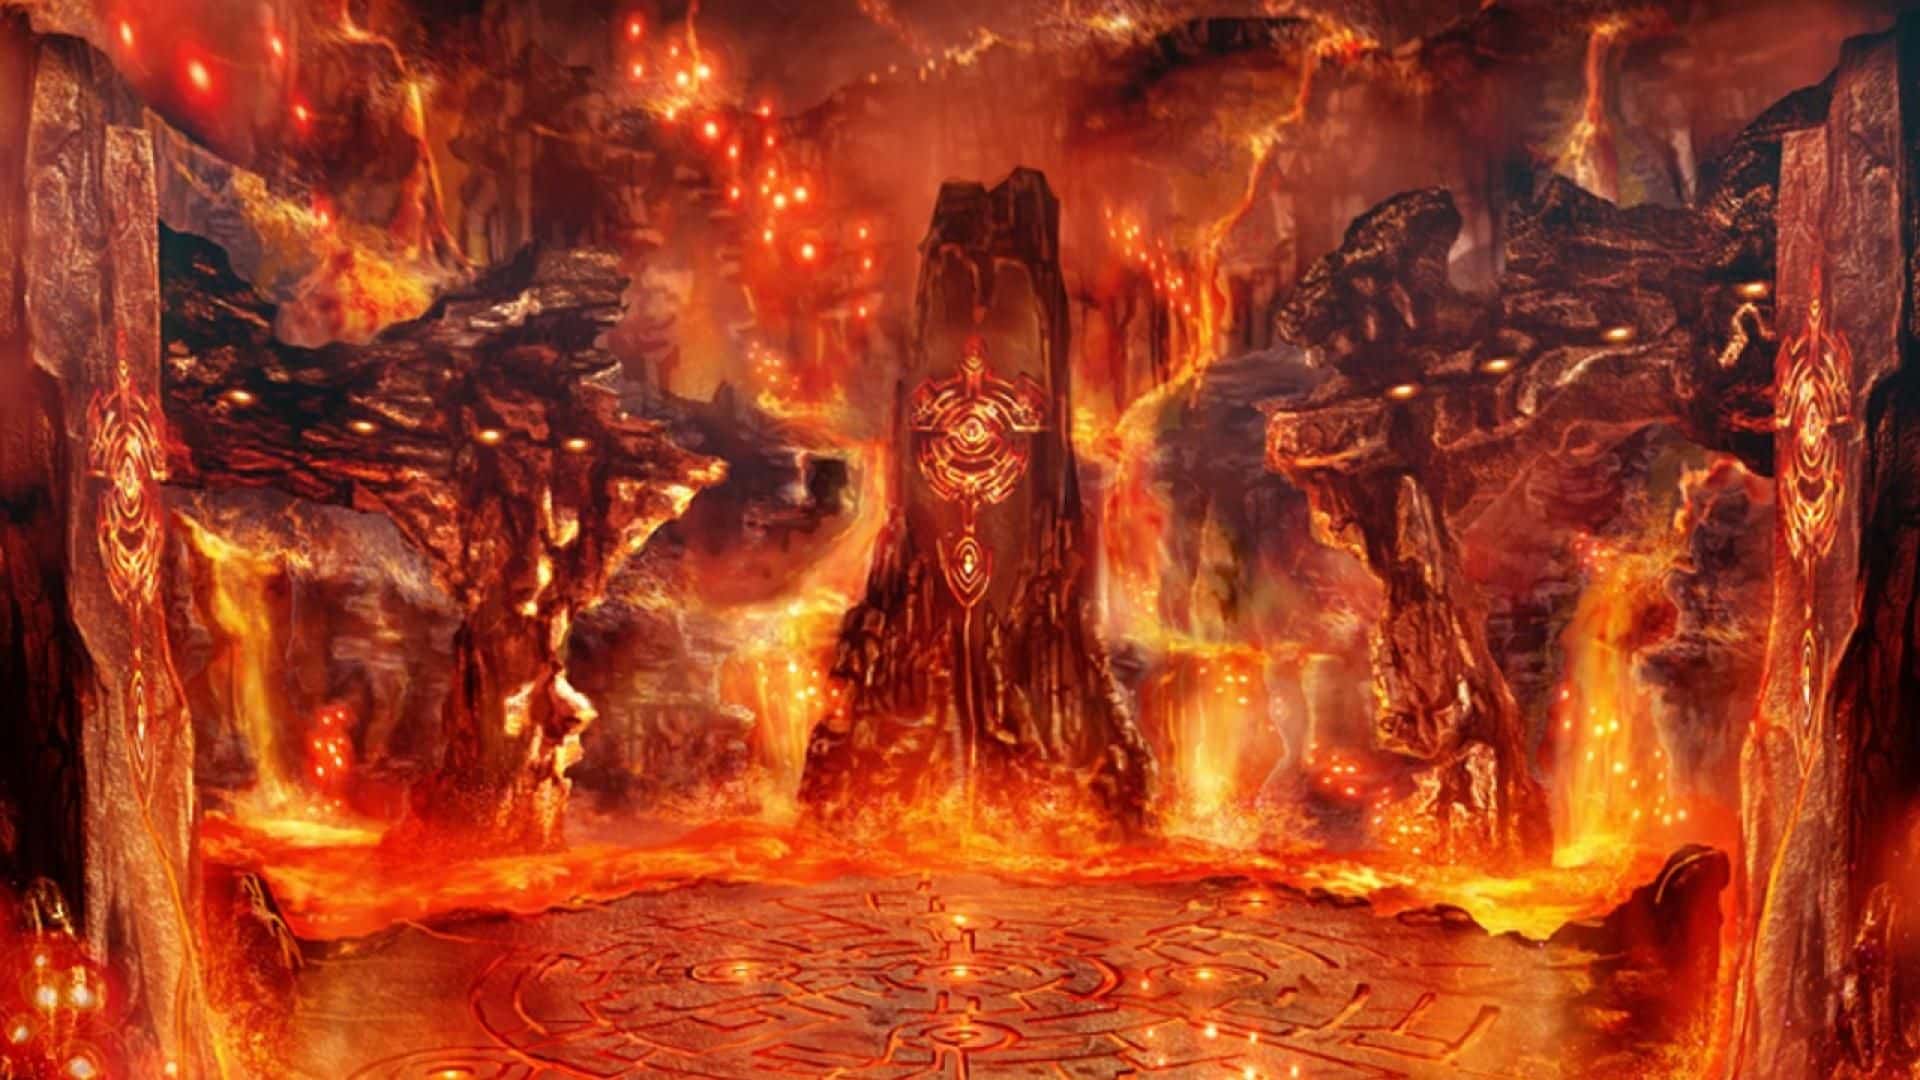 Is Hell Real or a Metaphor?